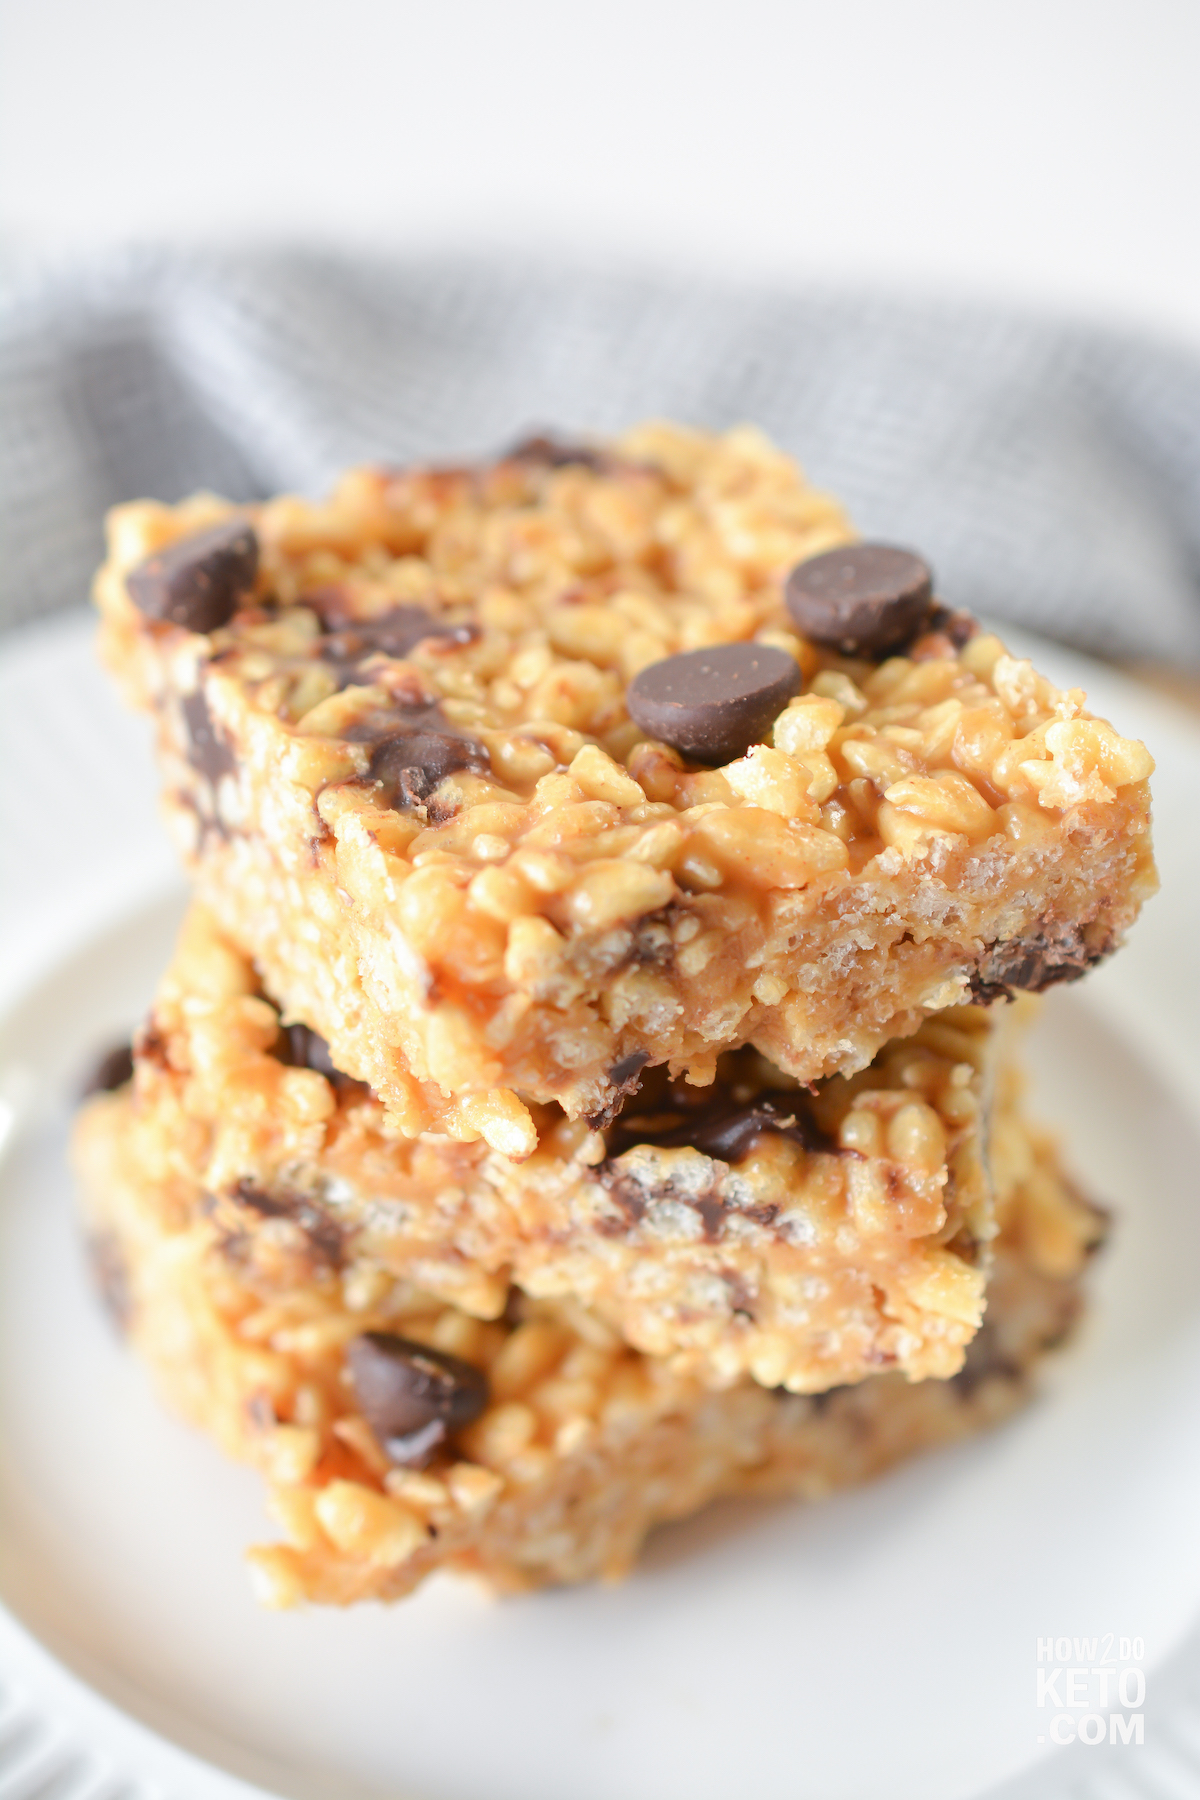 keto friendly peanut butter rice krispie treats with chocolate chips